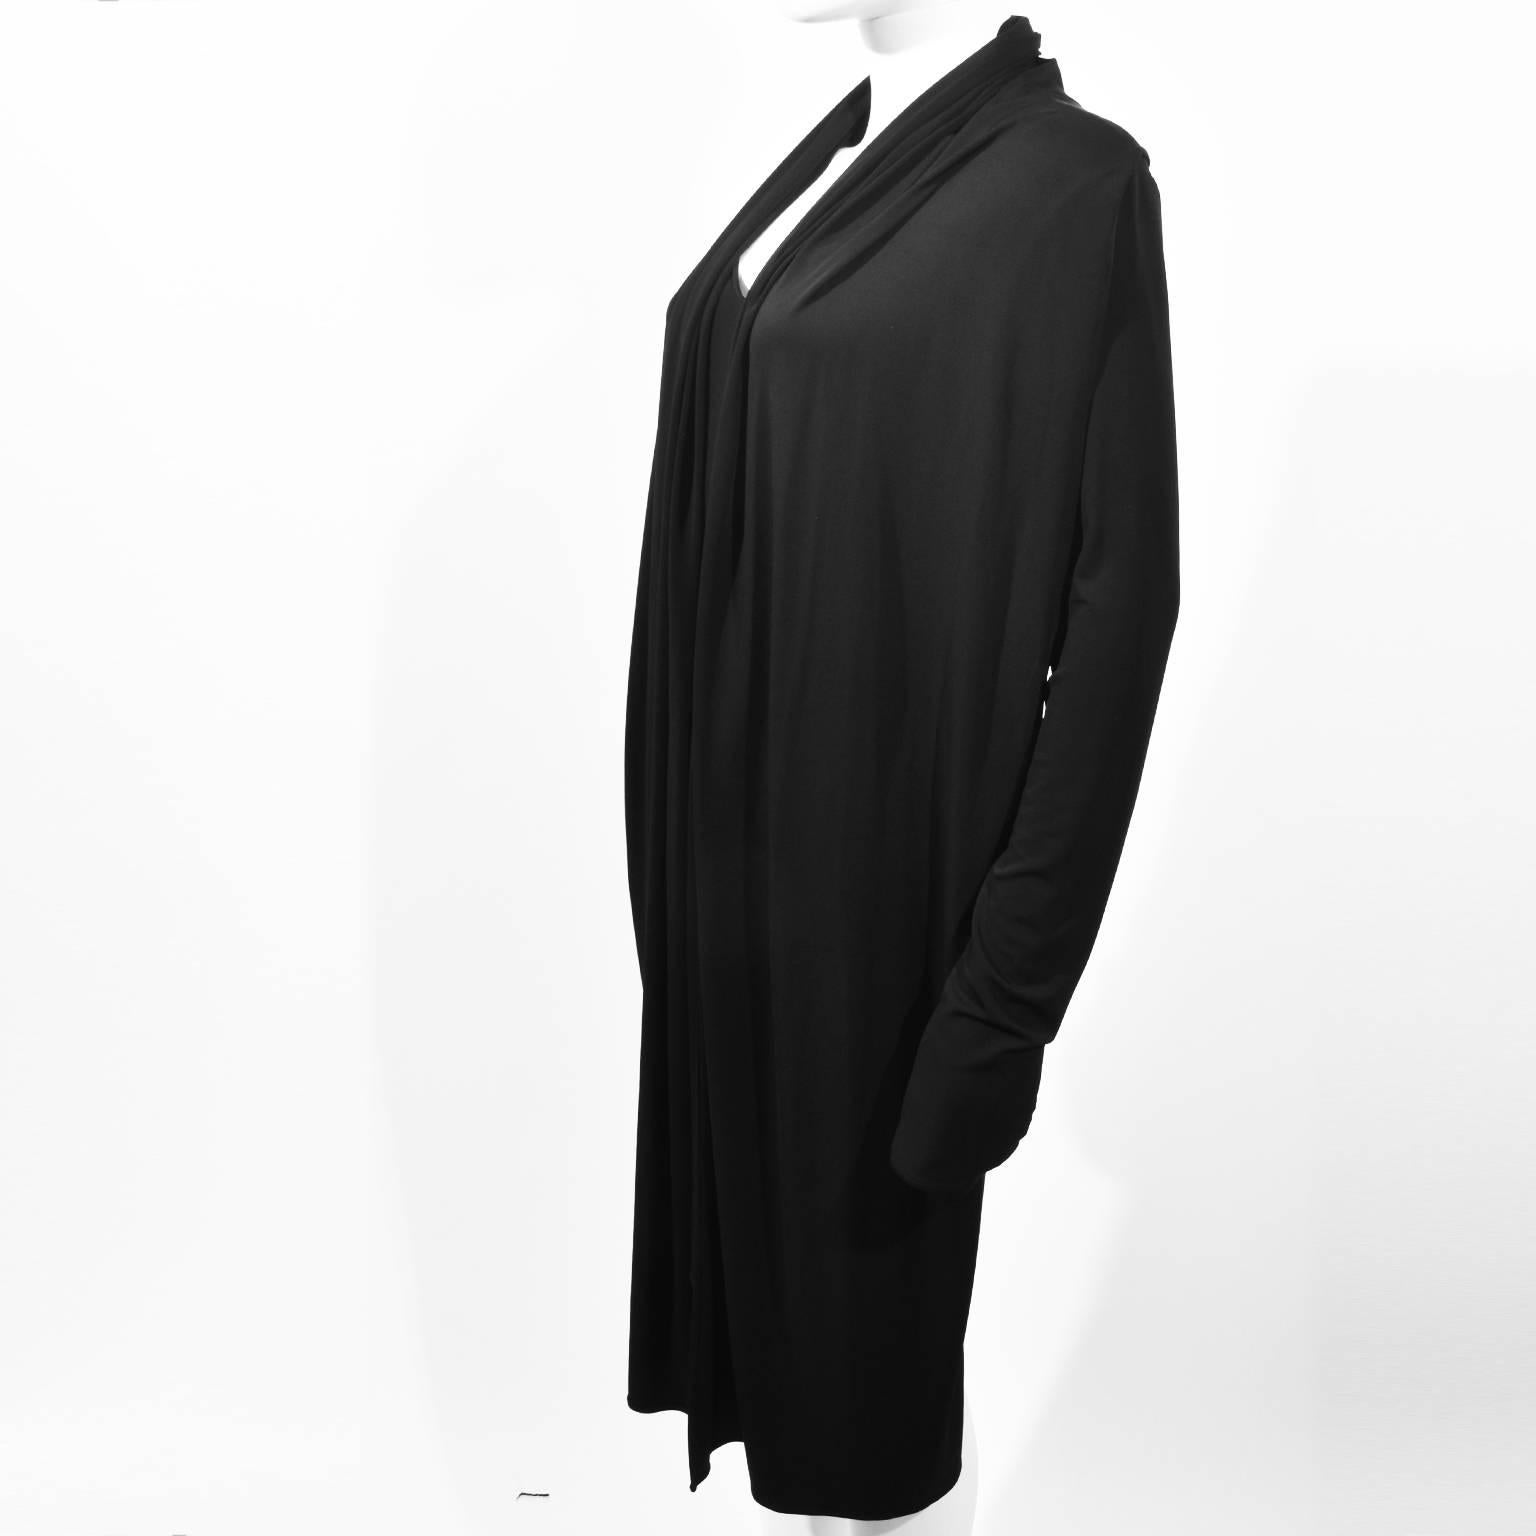 A black loose-fitting viscose dress by Maison Martin Margiela featuring an attached waistcoat with a shawl-like collar. An Italian 46 (UK 14), it is in excellent condition.